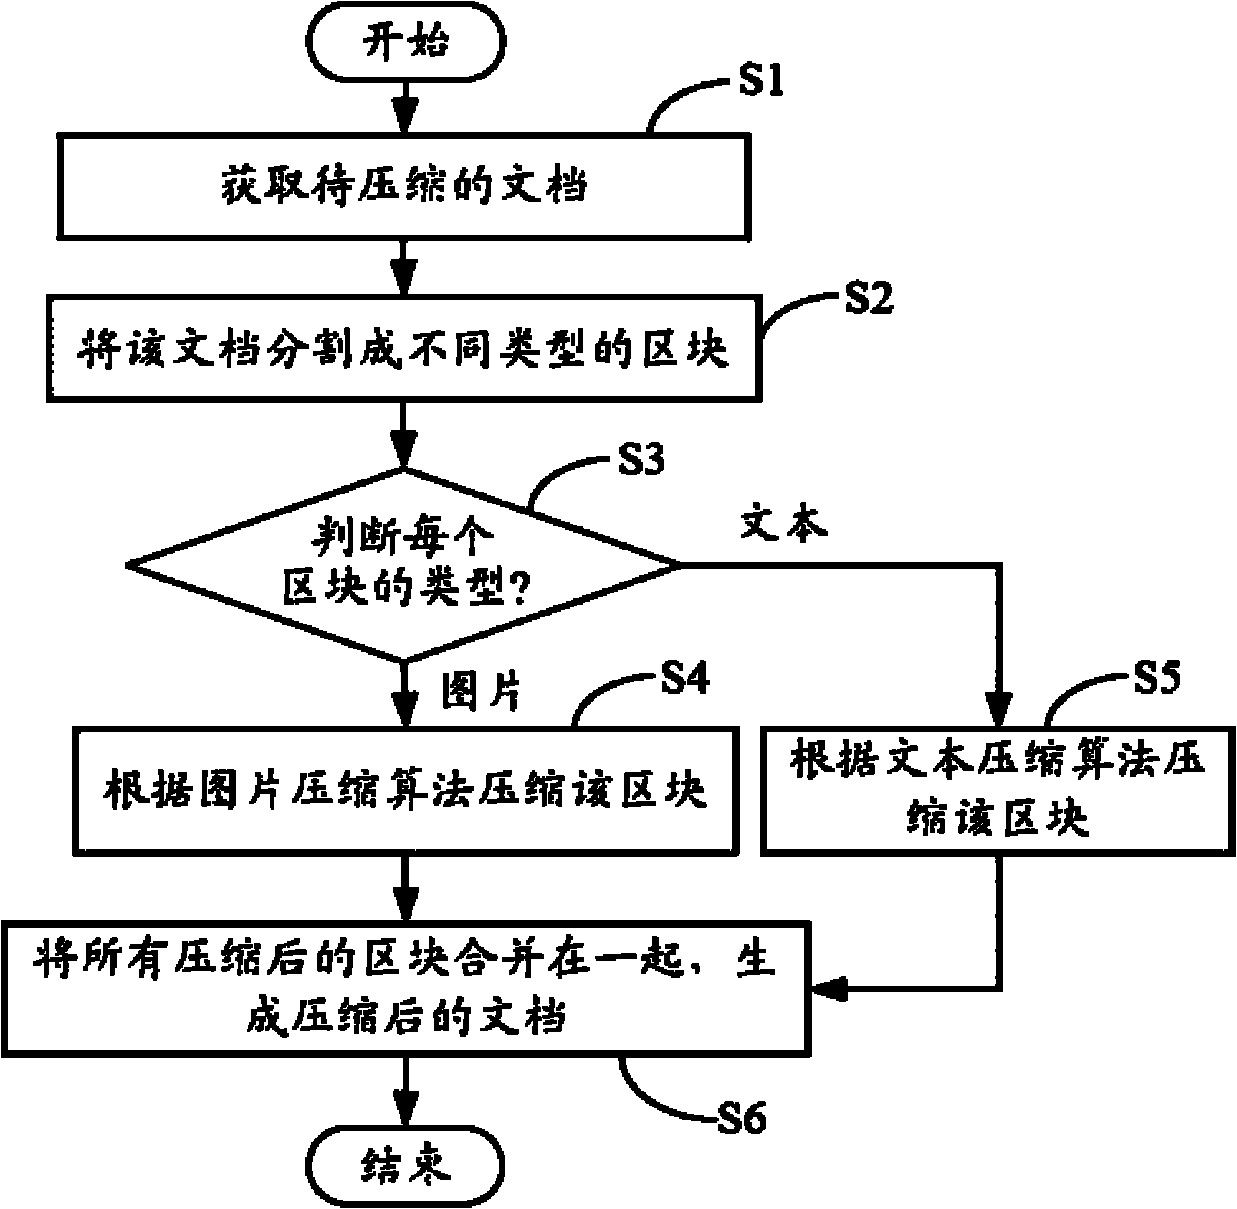 Document compression system and method